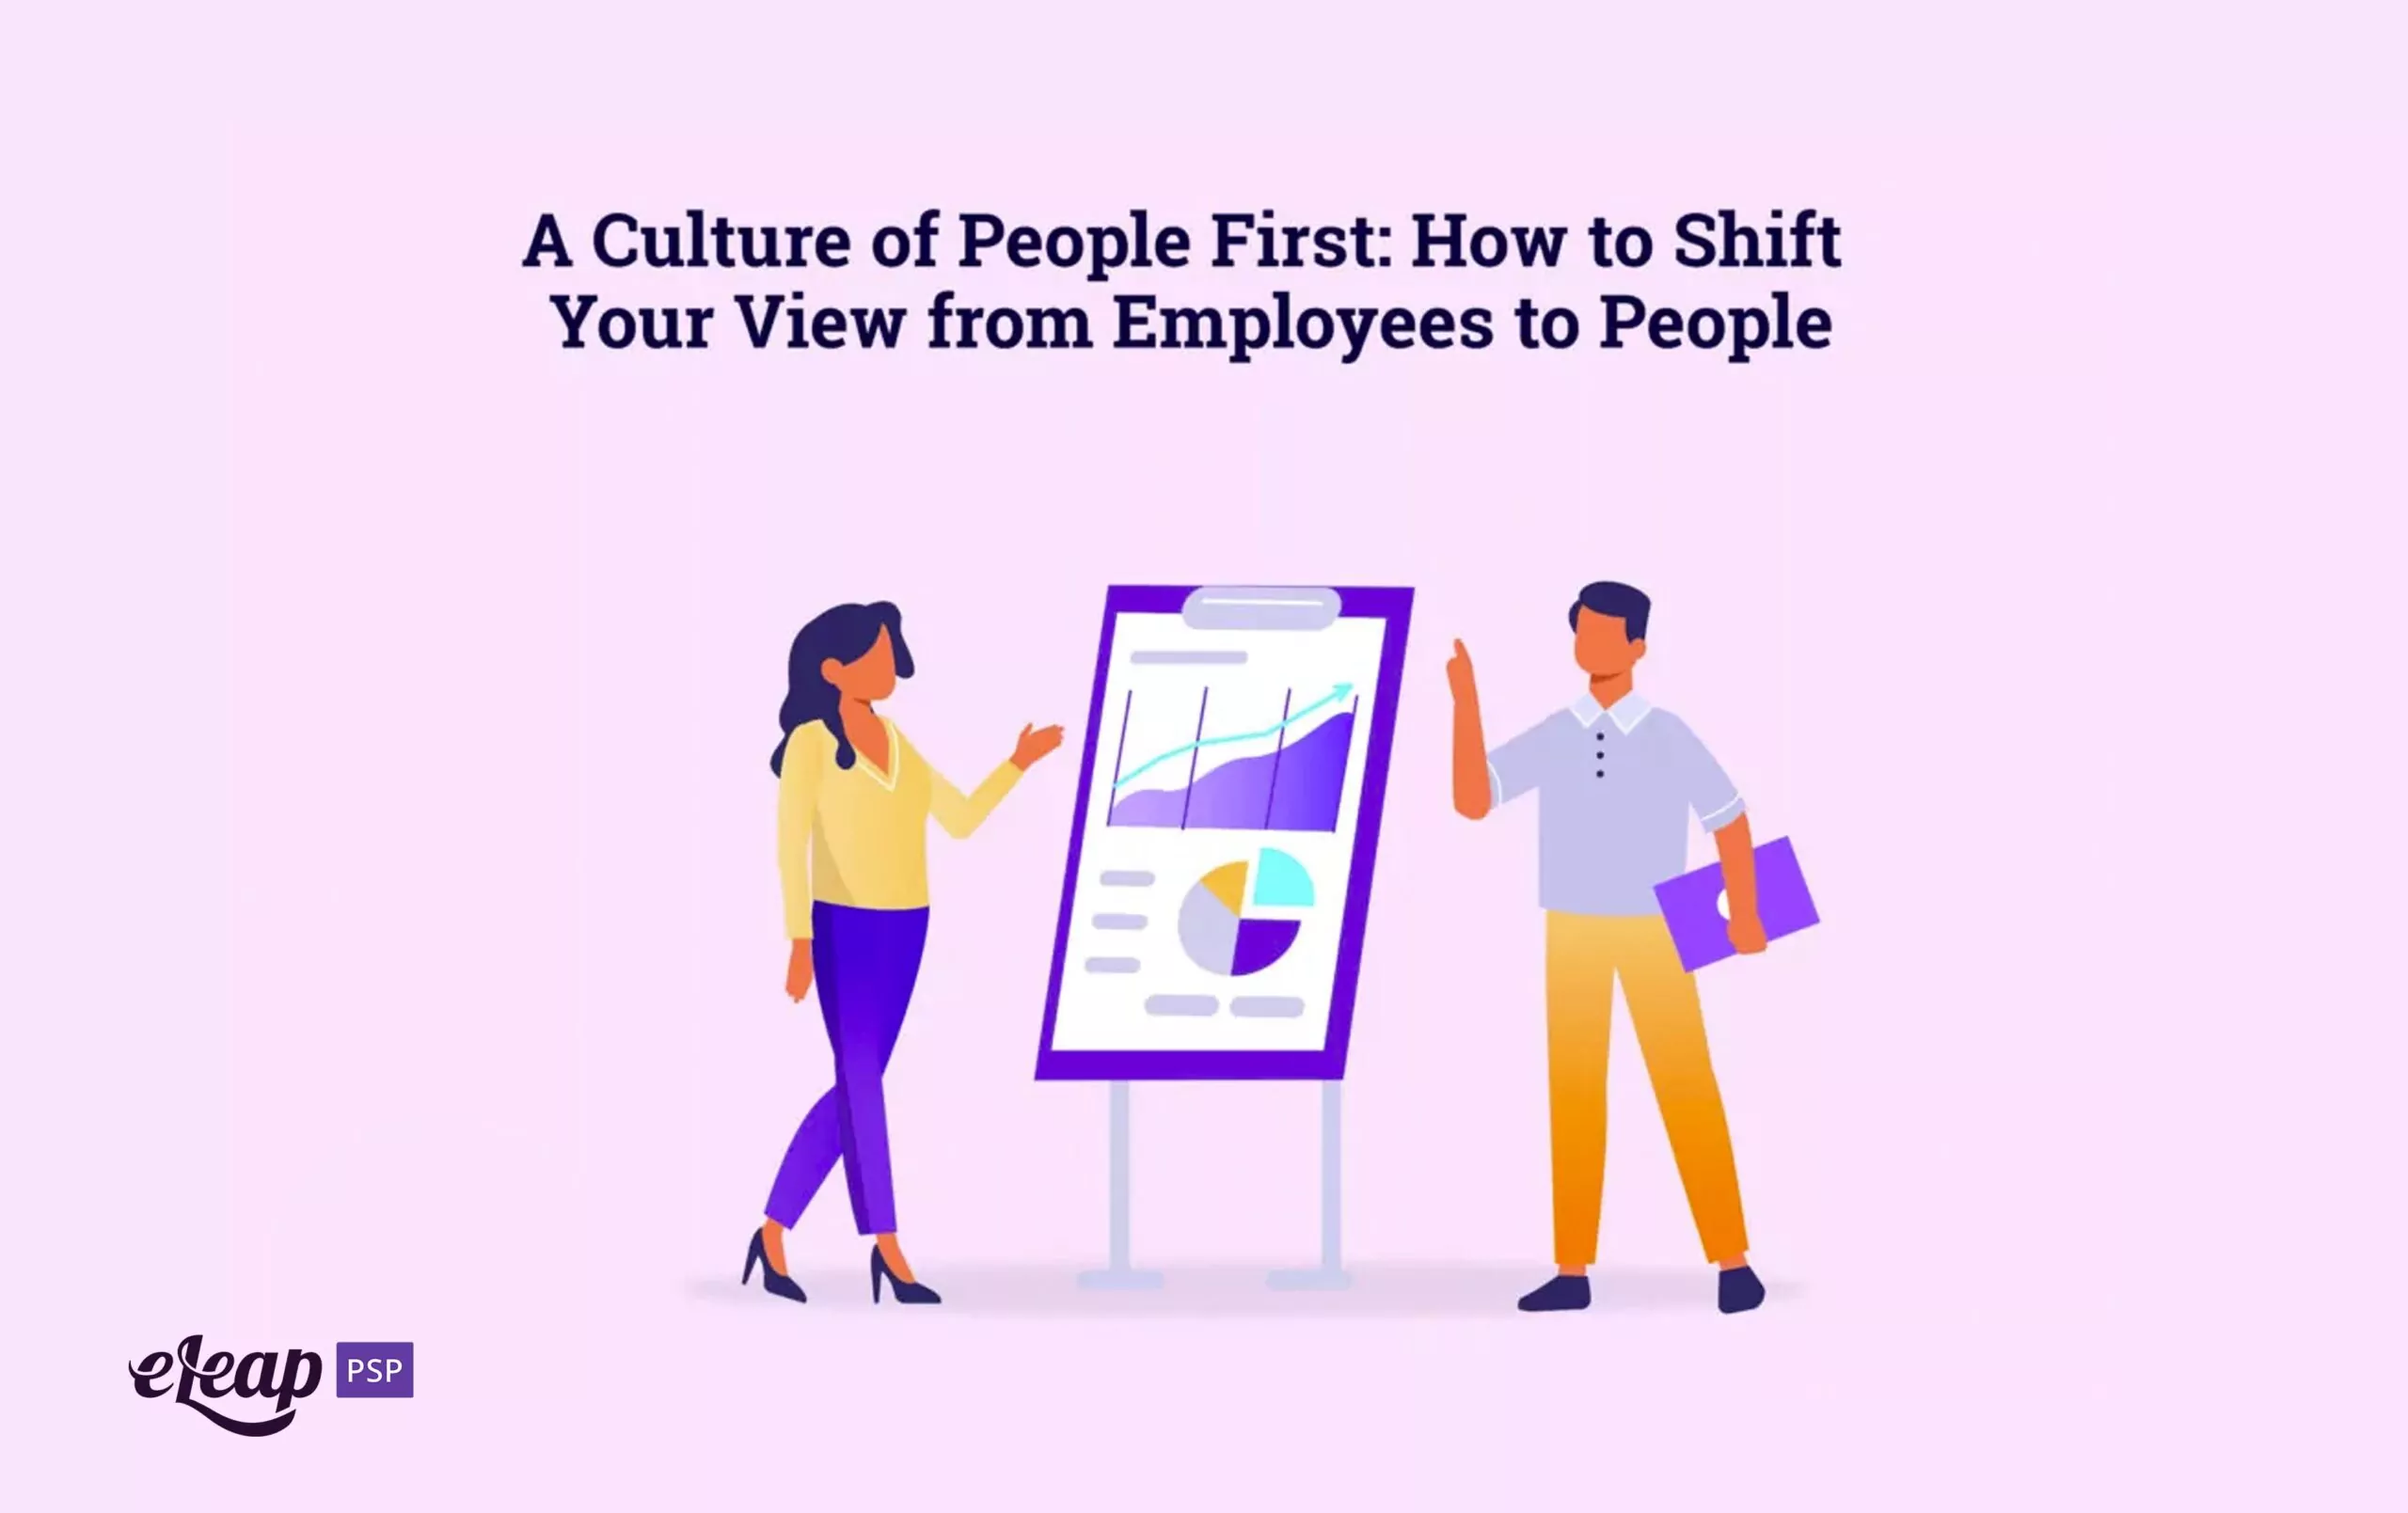 employees to people